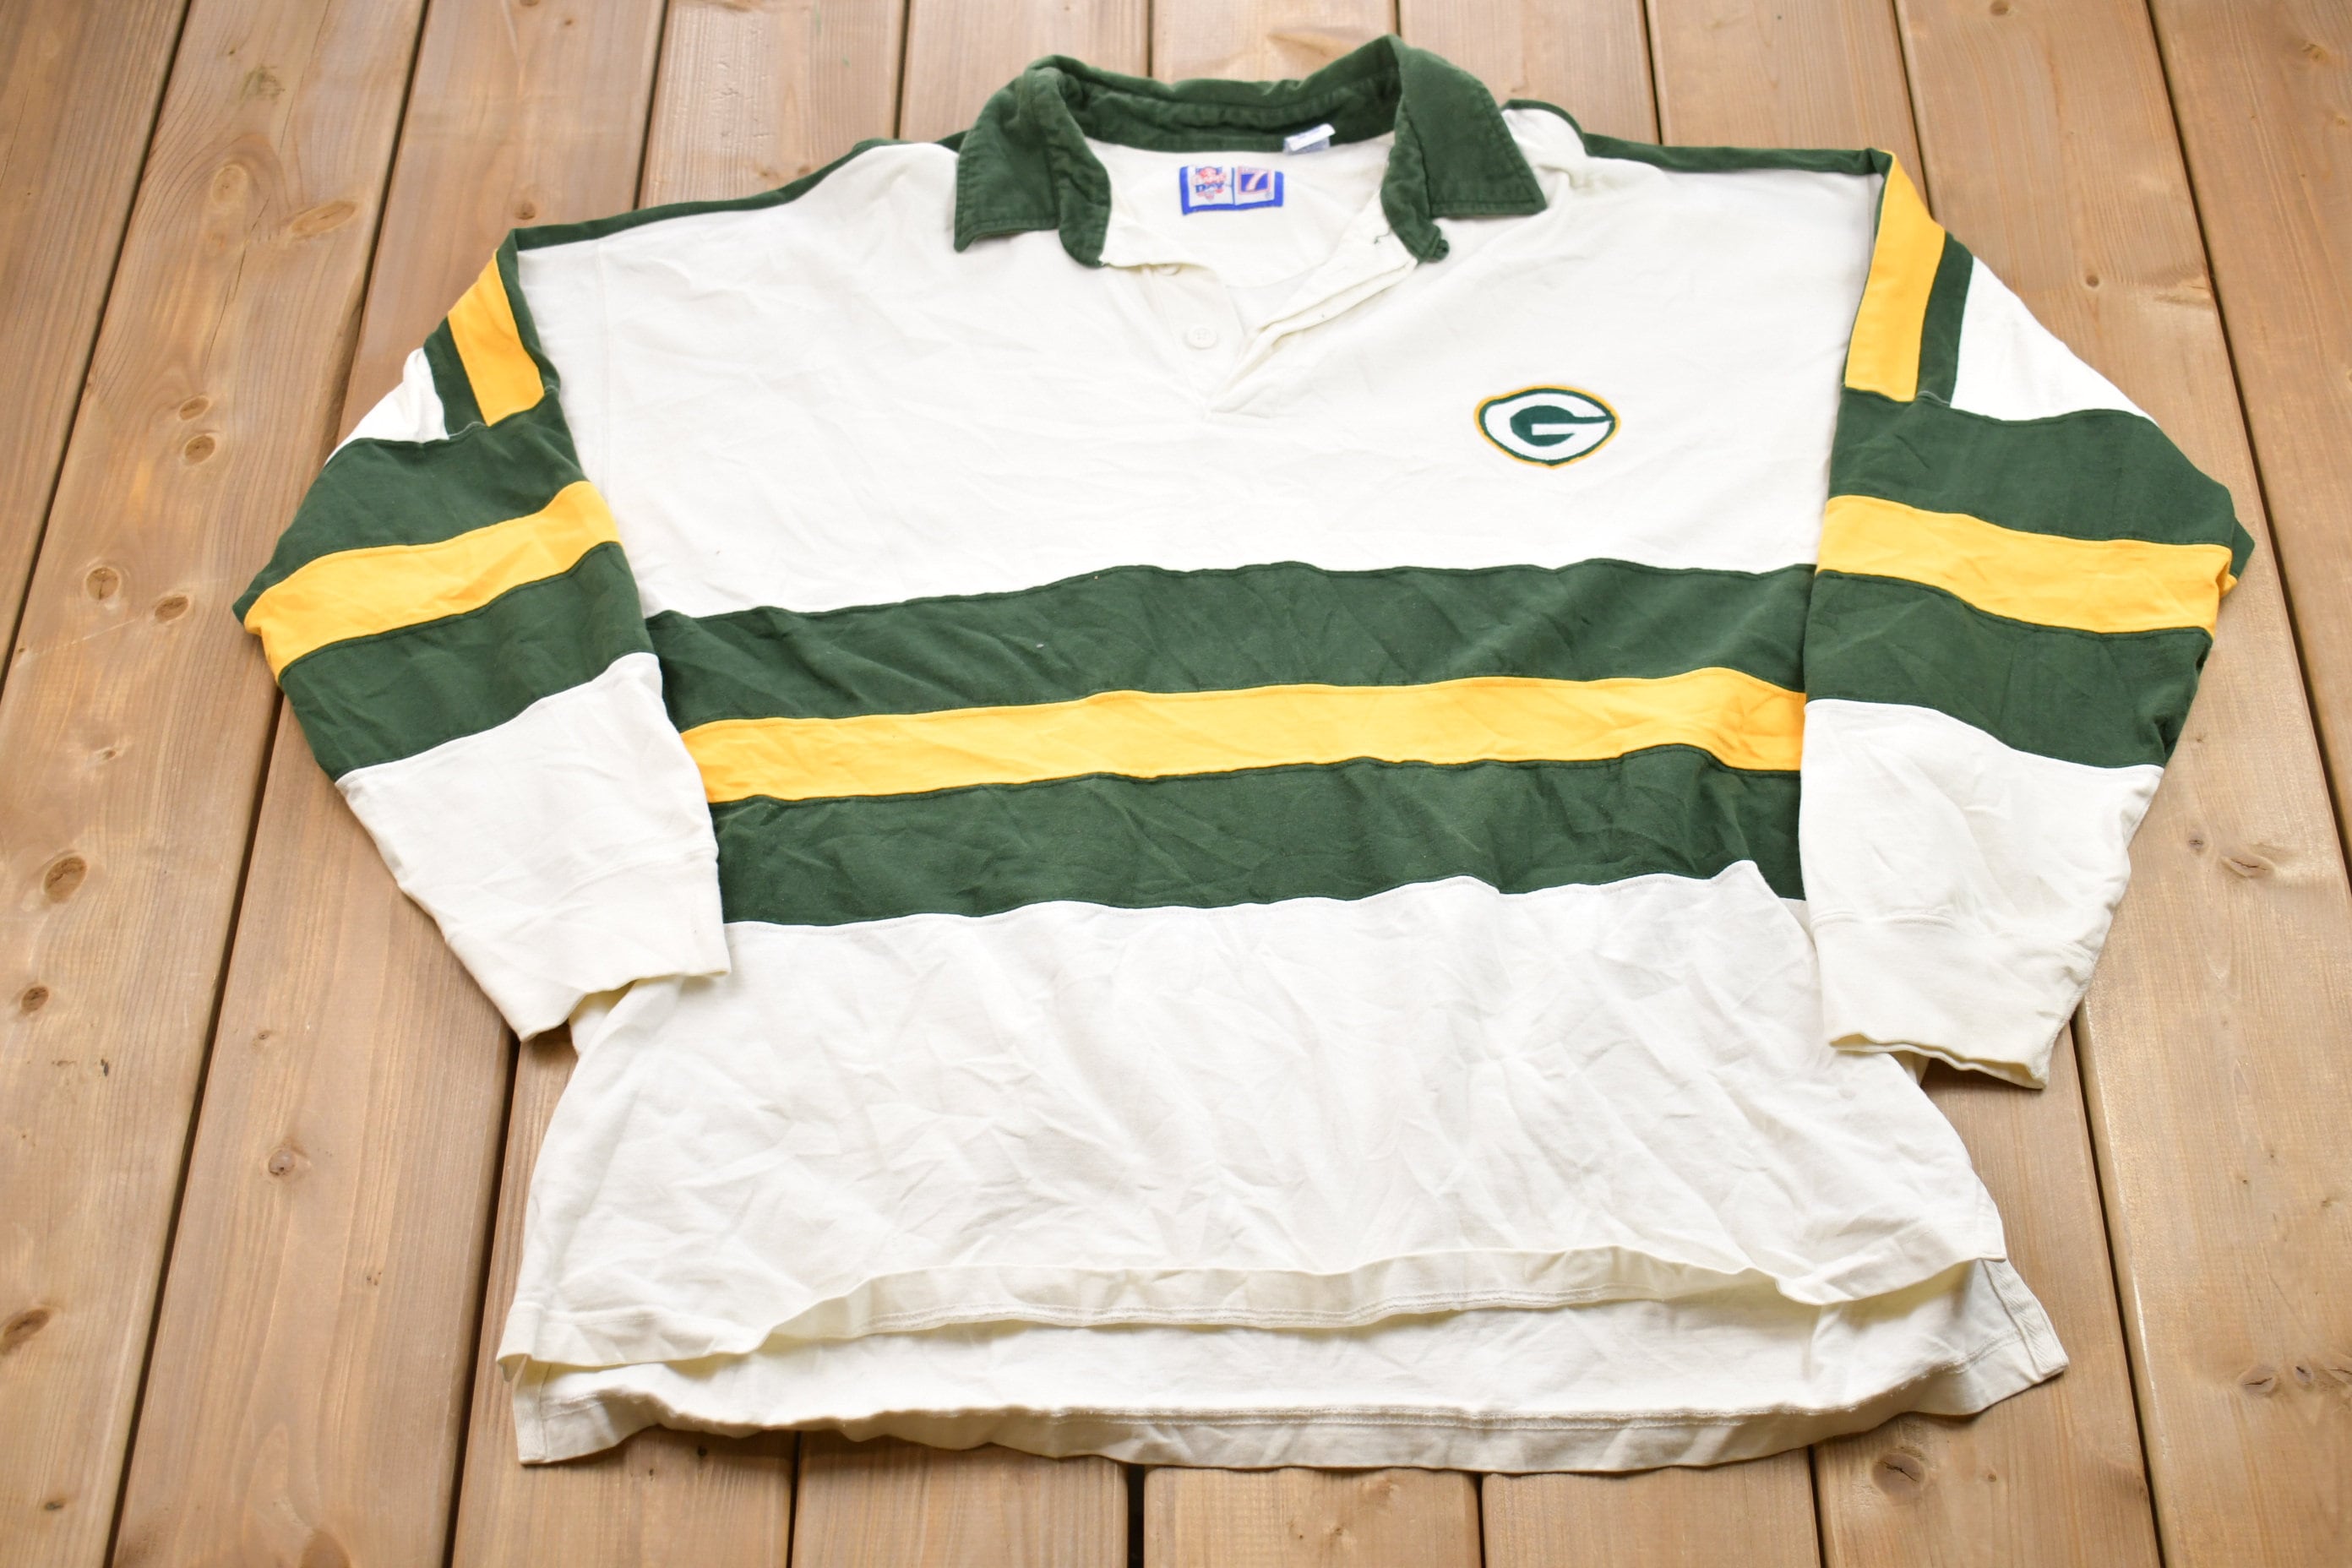 Nike Rugby Shirt - Etsy